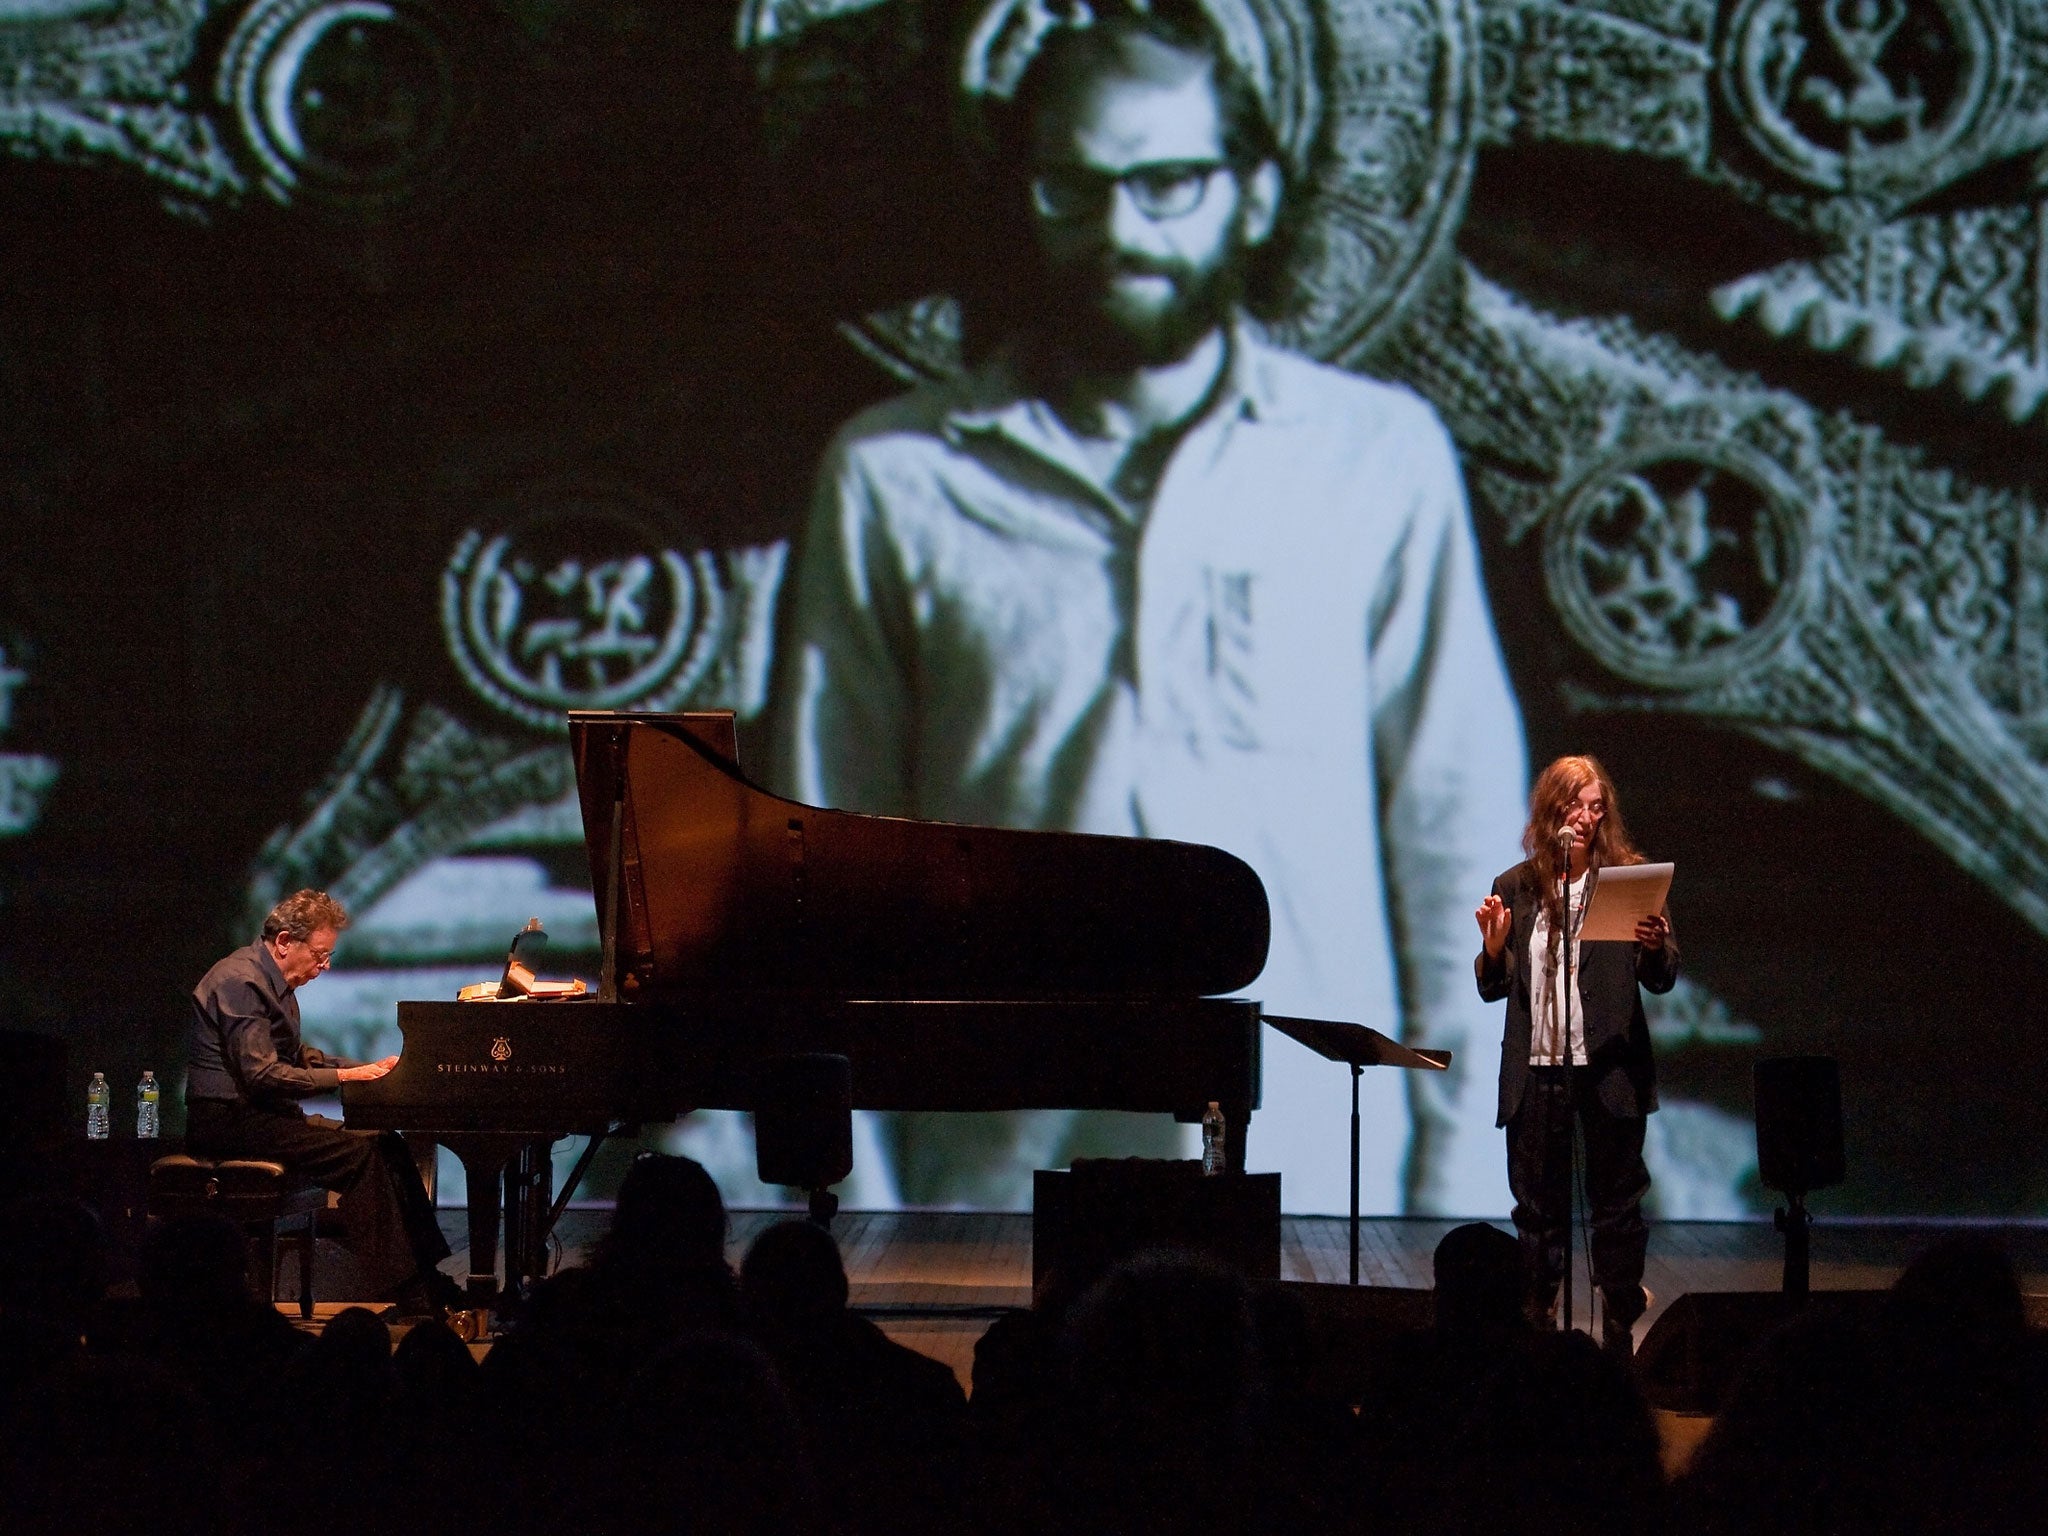 The beat goes on: Philip Glass and Patti Smith pay tribute to poet Allen Ginsberg